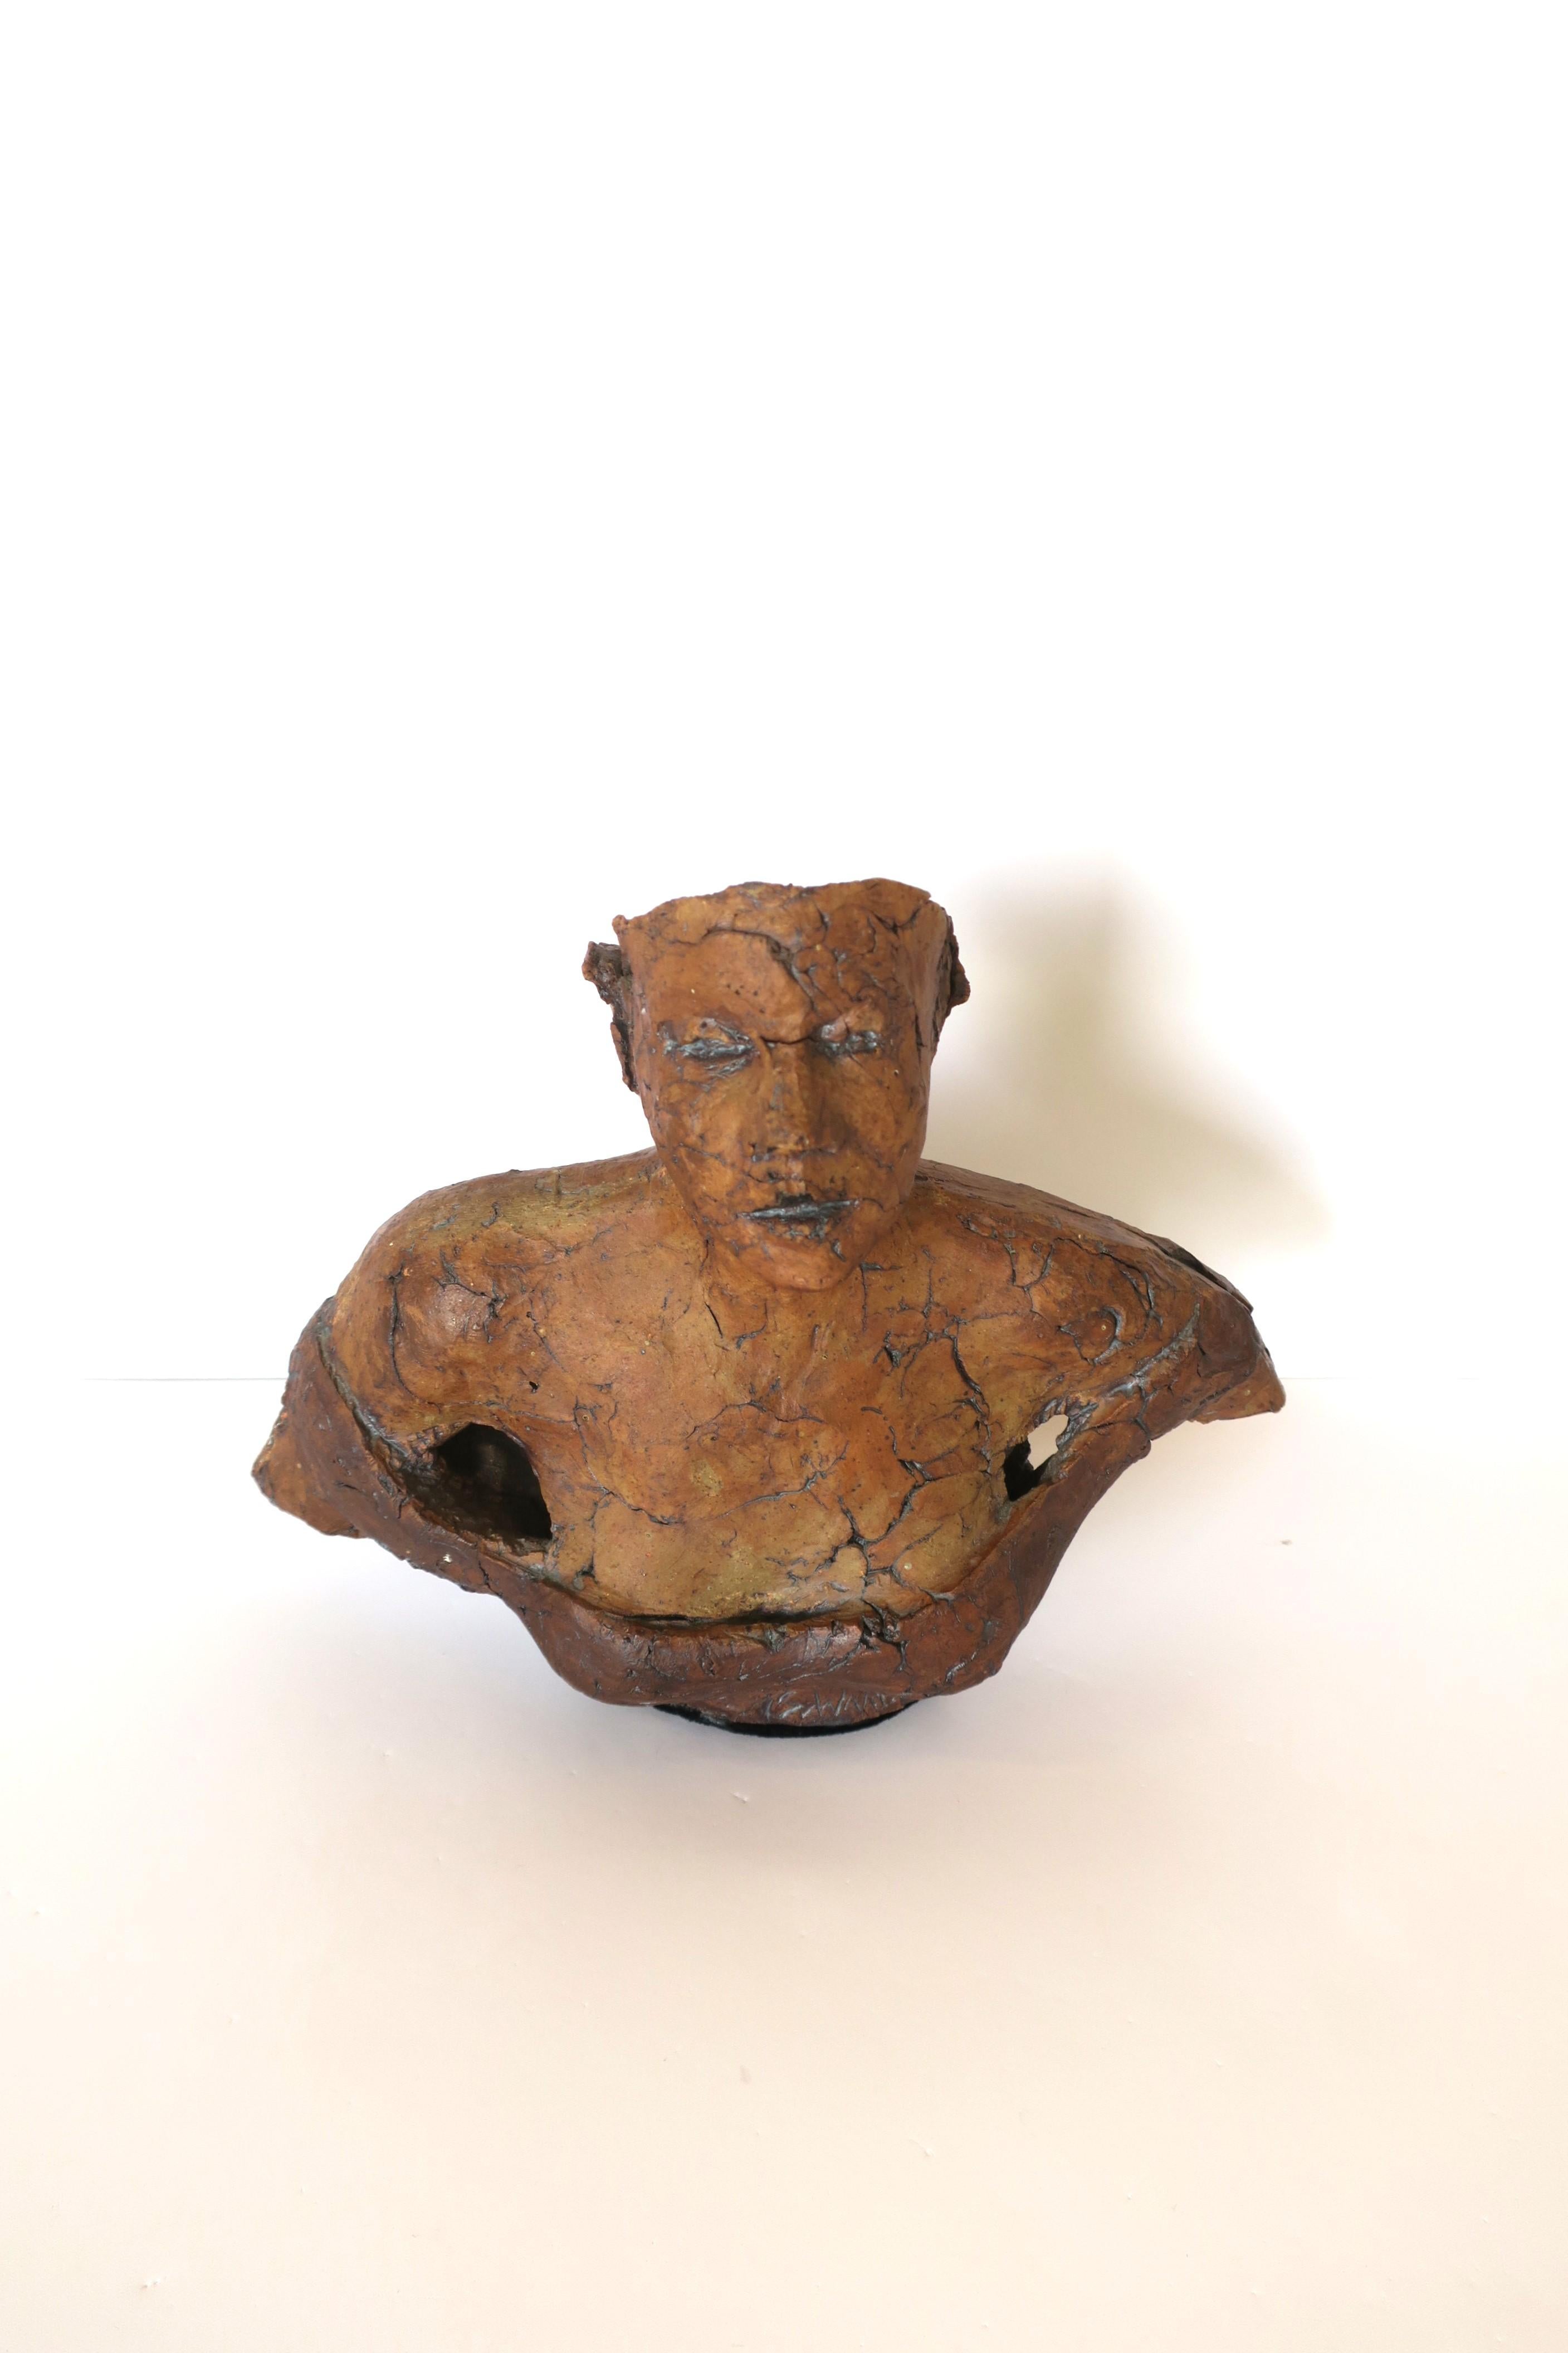 A female terracotta bust sculpture. Great as a standalone piece, on a pedestal, shelf, etc. Signature at base as shown in last image. Dimensions: 4